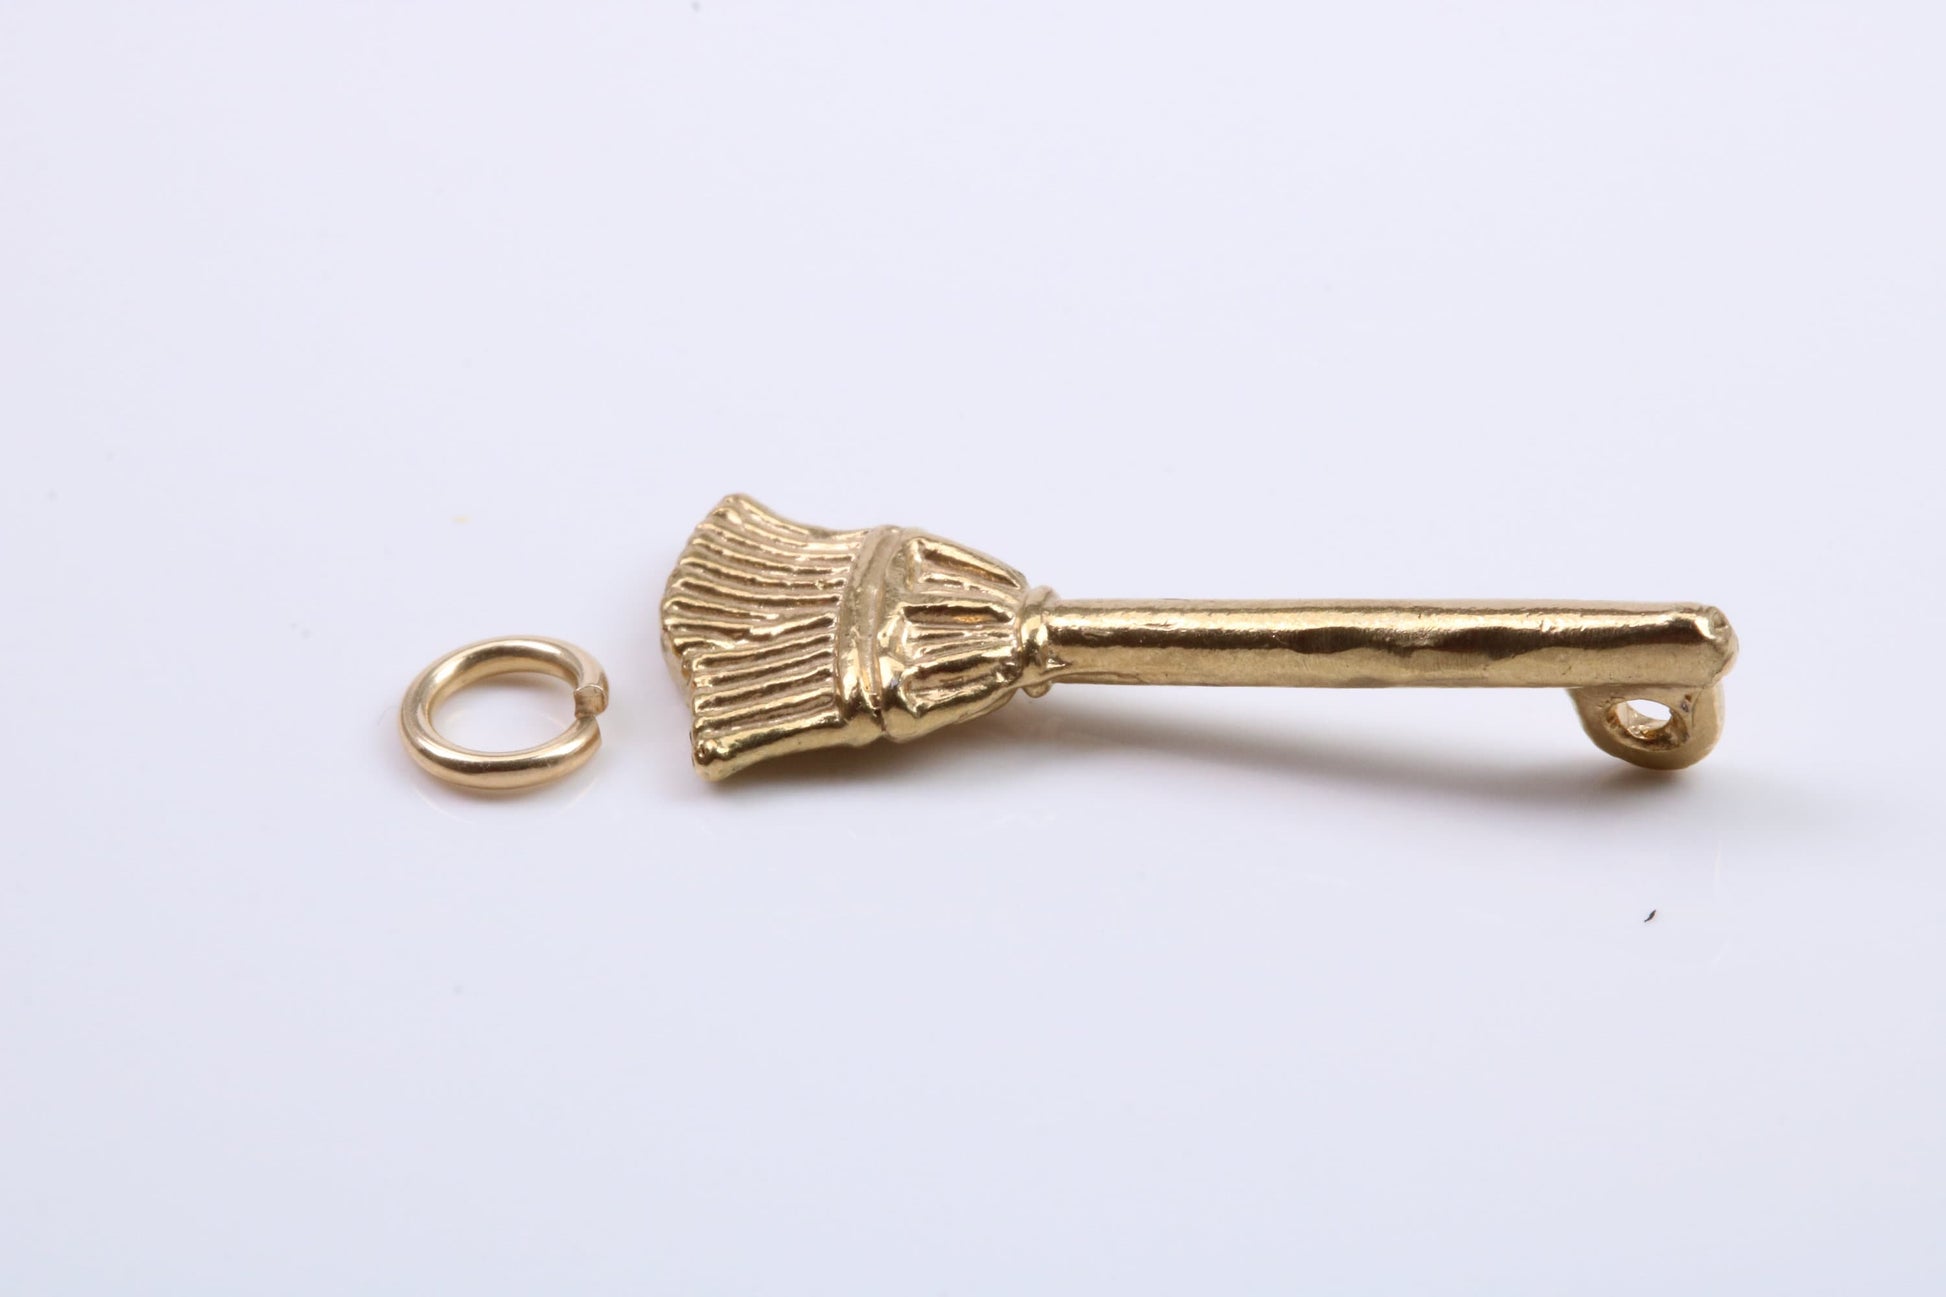 Witches Broom Stick Charm, Traditional Charm, Made from Solid 9ct Yellow Gold, British Hallmarked, Complete with Attachment Link